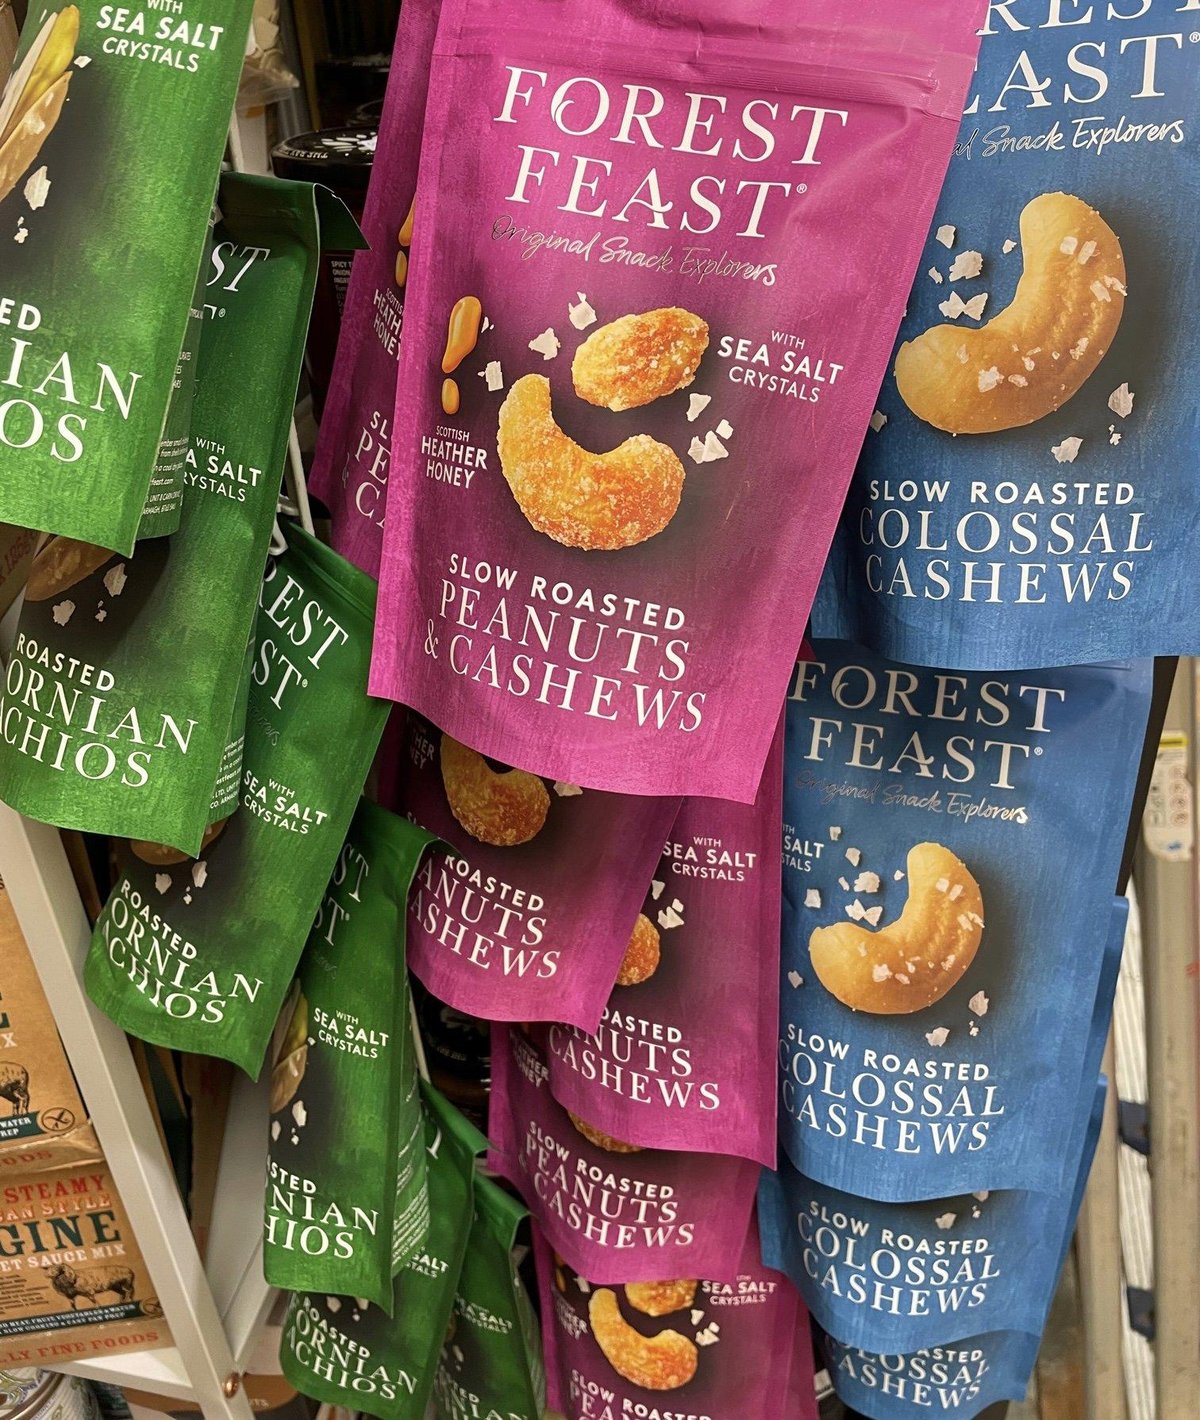 Snack brand aims to plant forests to cut climate threat